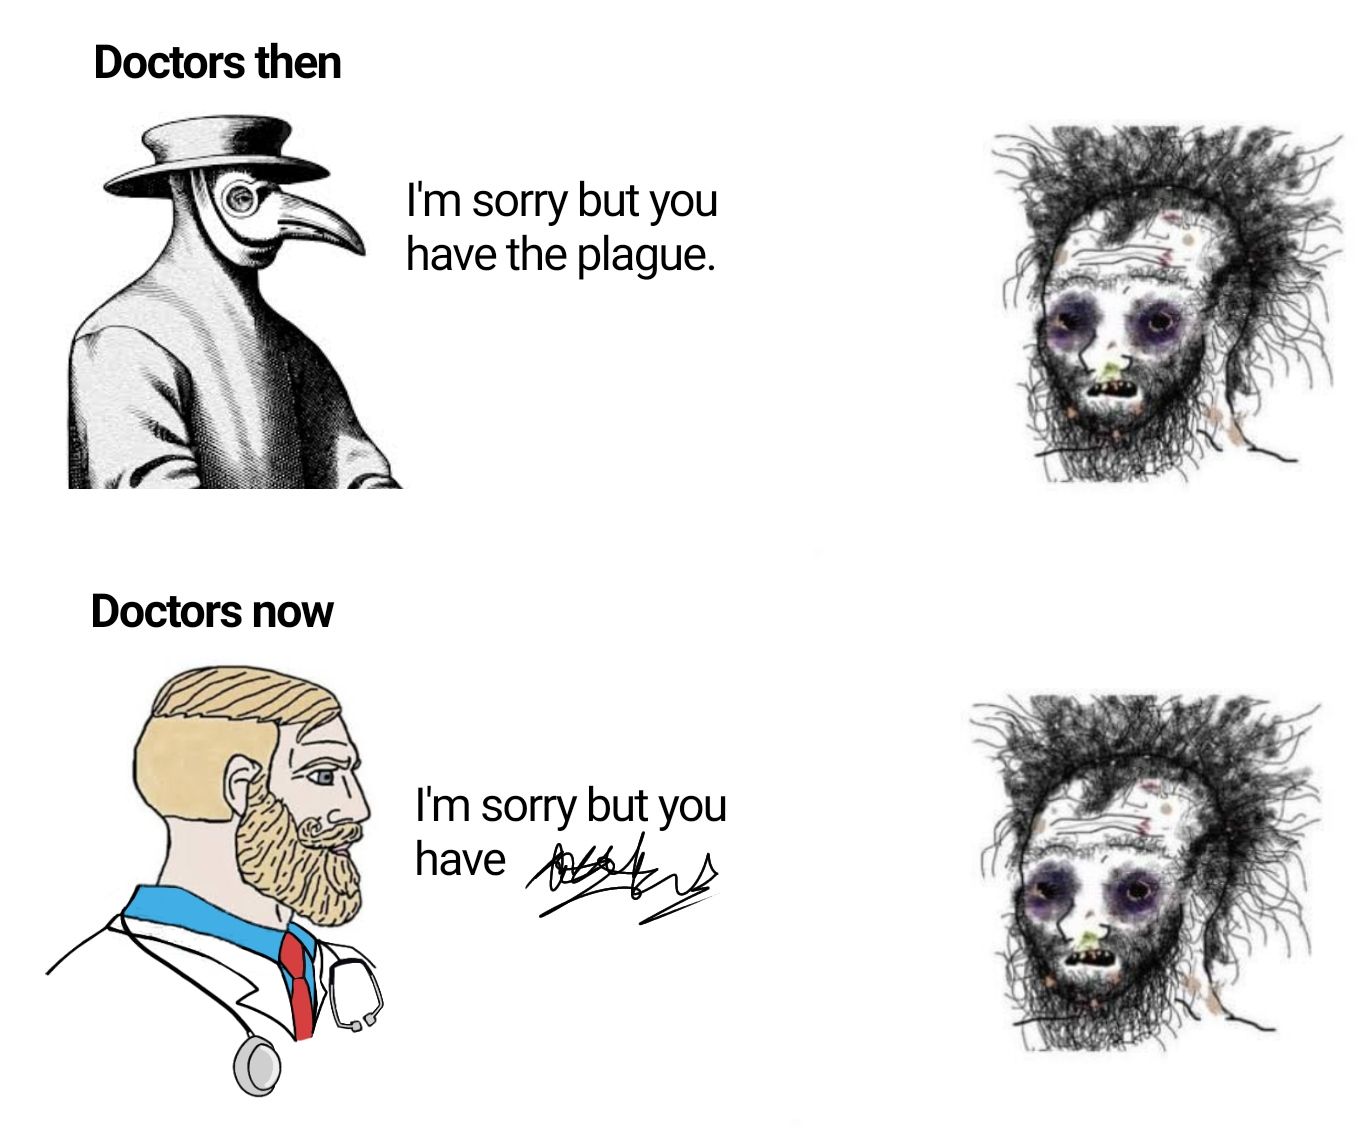 Can you repeat that doc?